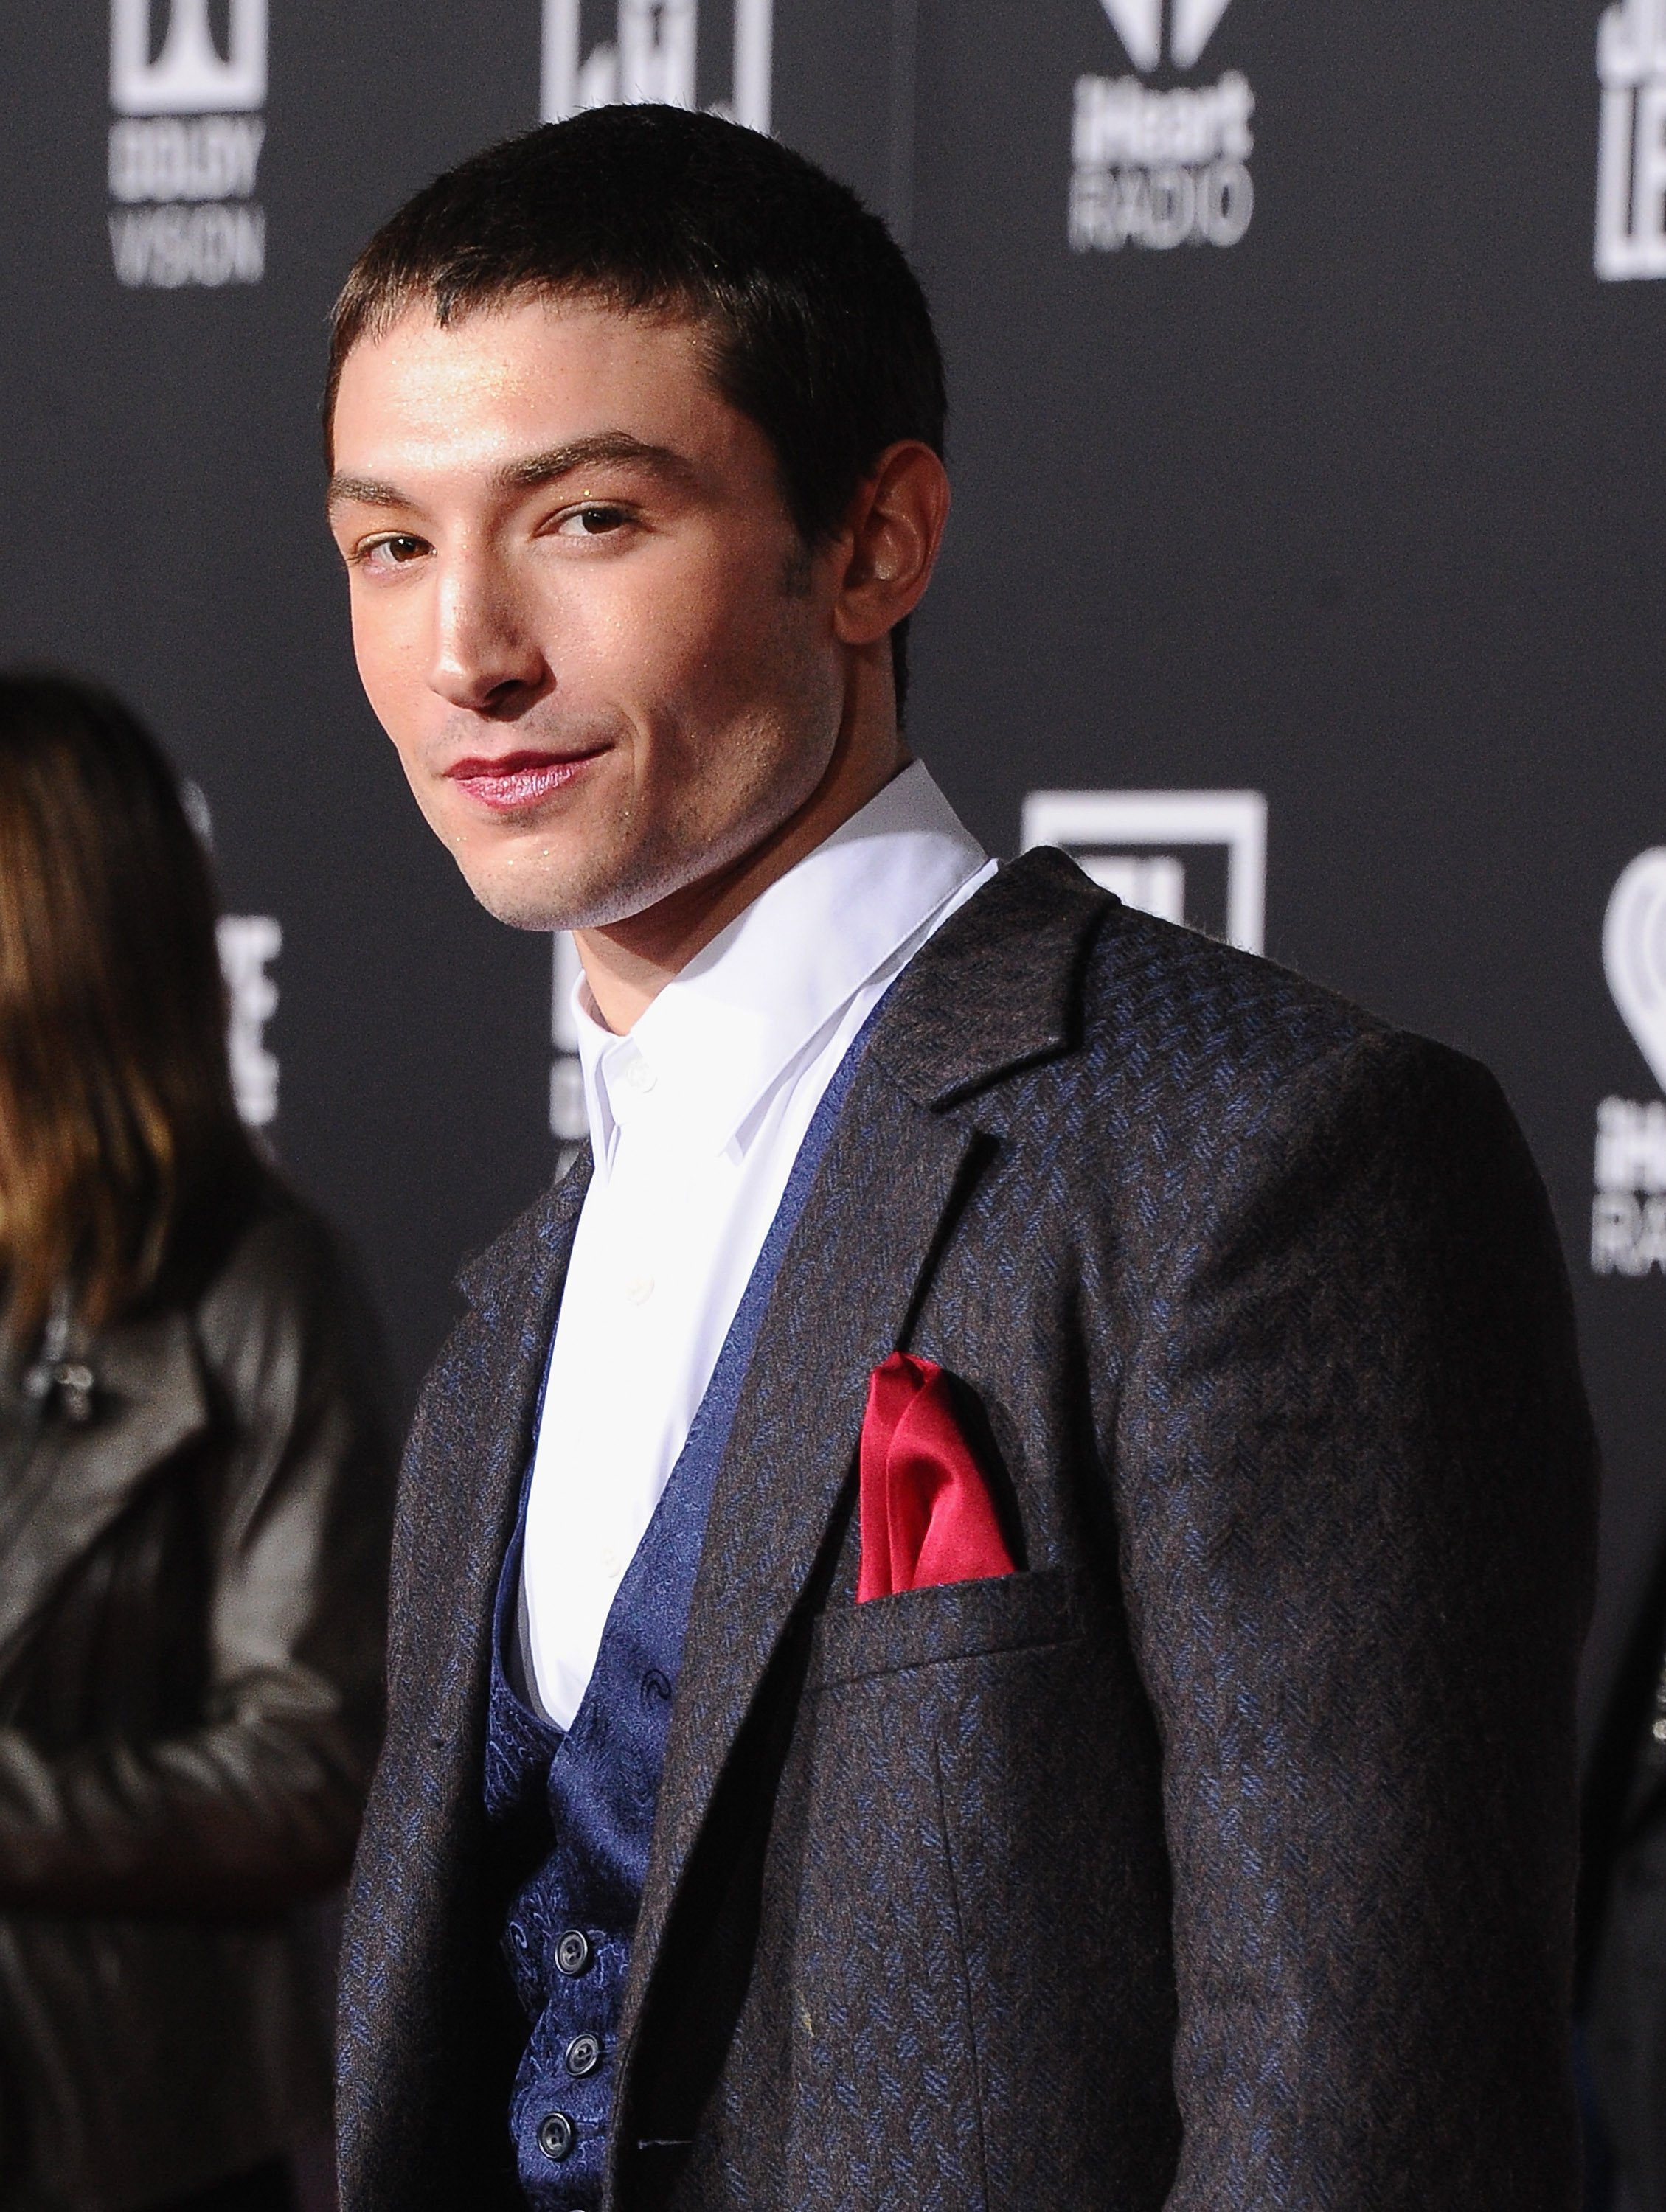 Ezra Miller attends the Los Angeles Premiere of Warner Bros. Pictures' "Justice League" at Dolby Theatre on November 13, 2017, in Hollywood, California. | Source: Getty Images